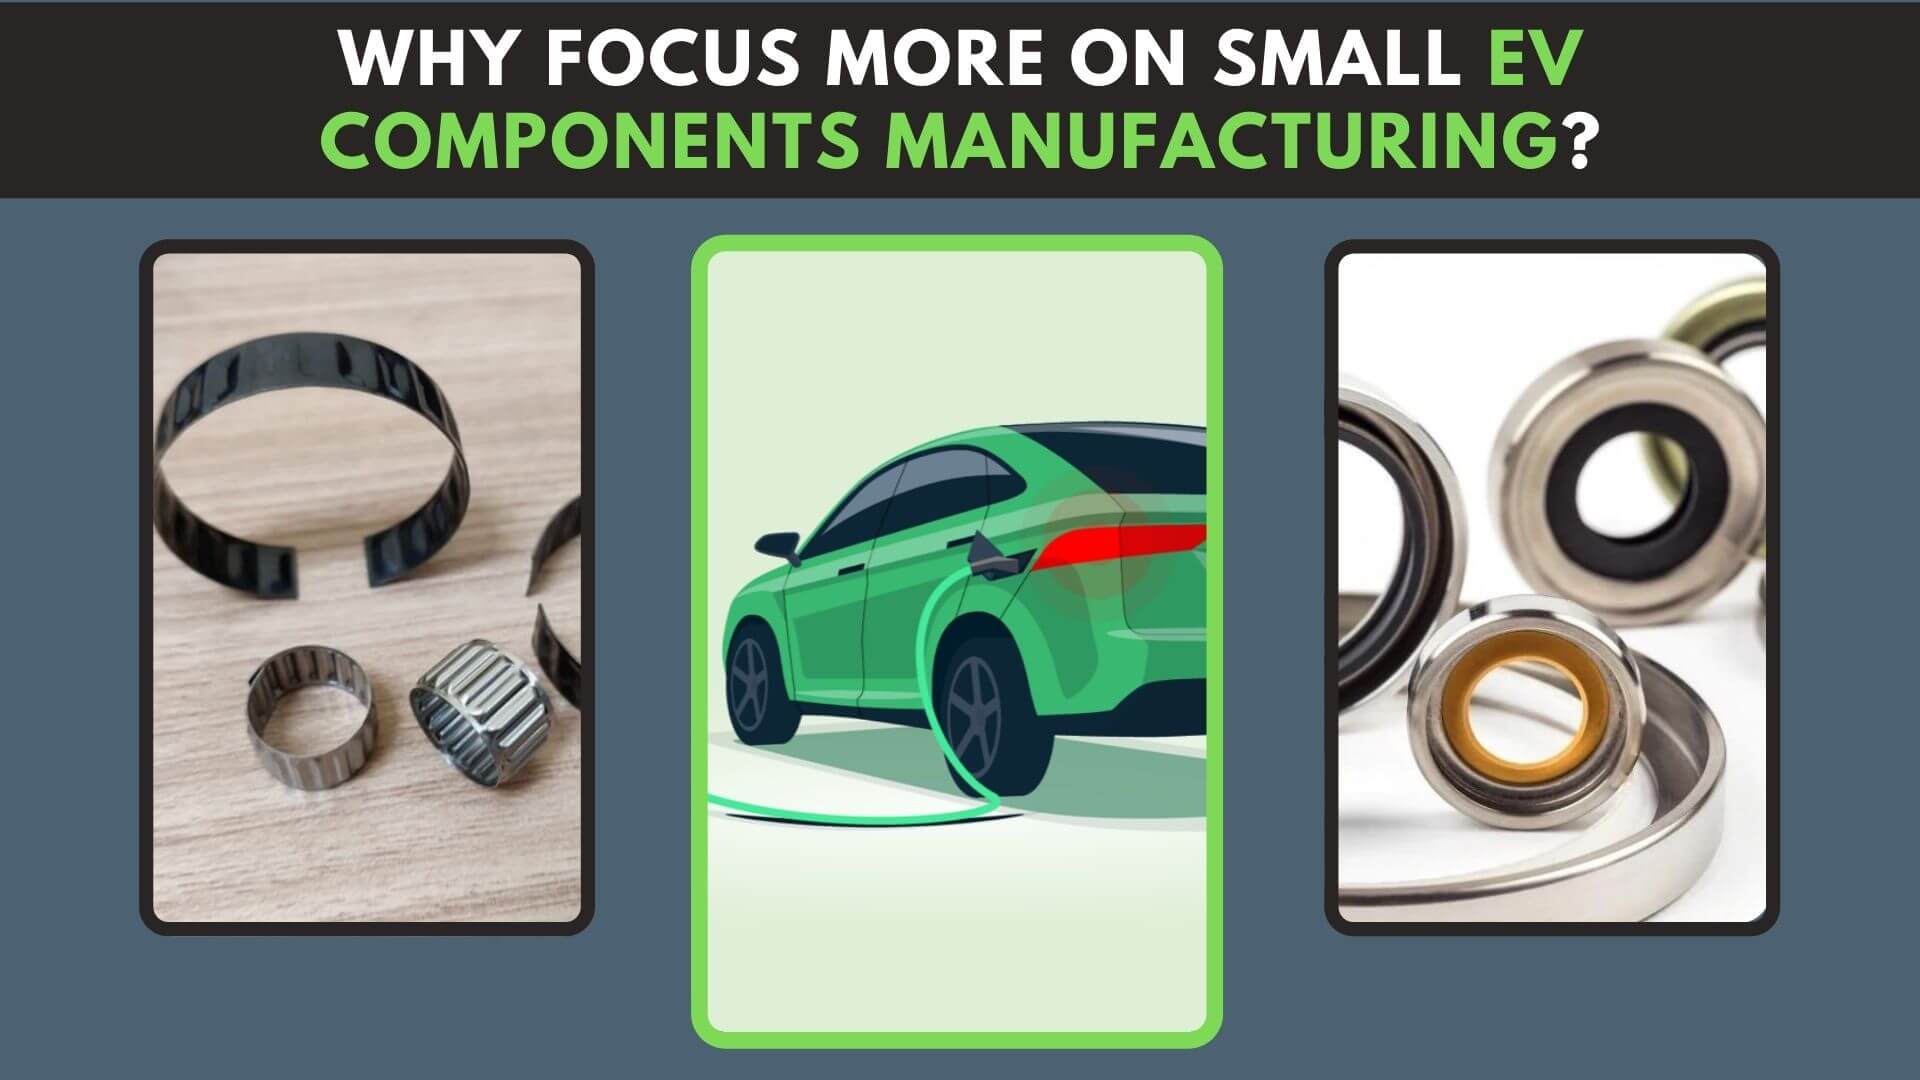 https://e-vehicleinfo.com/why-focus-more-on-small-ev-components-manufacturing/